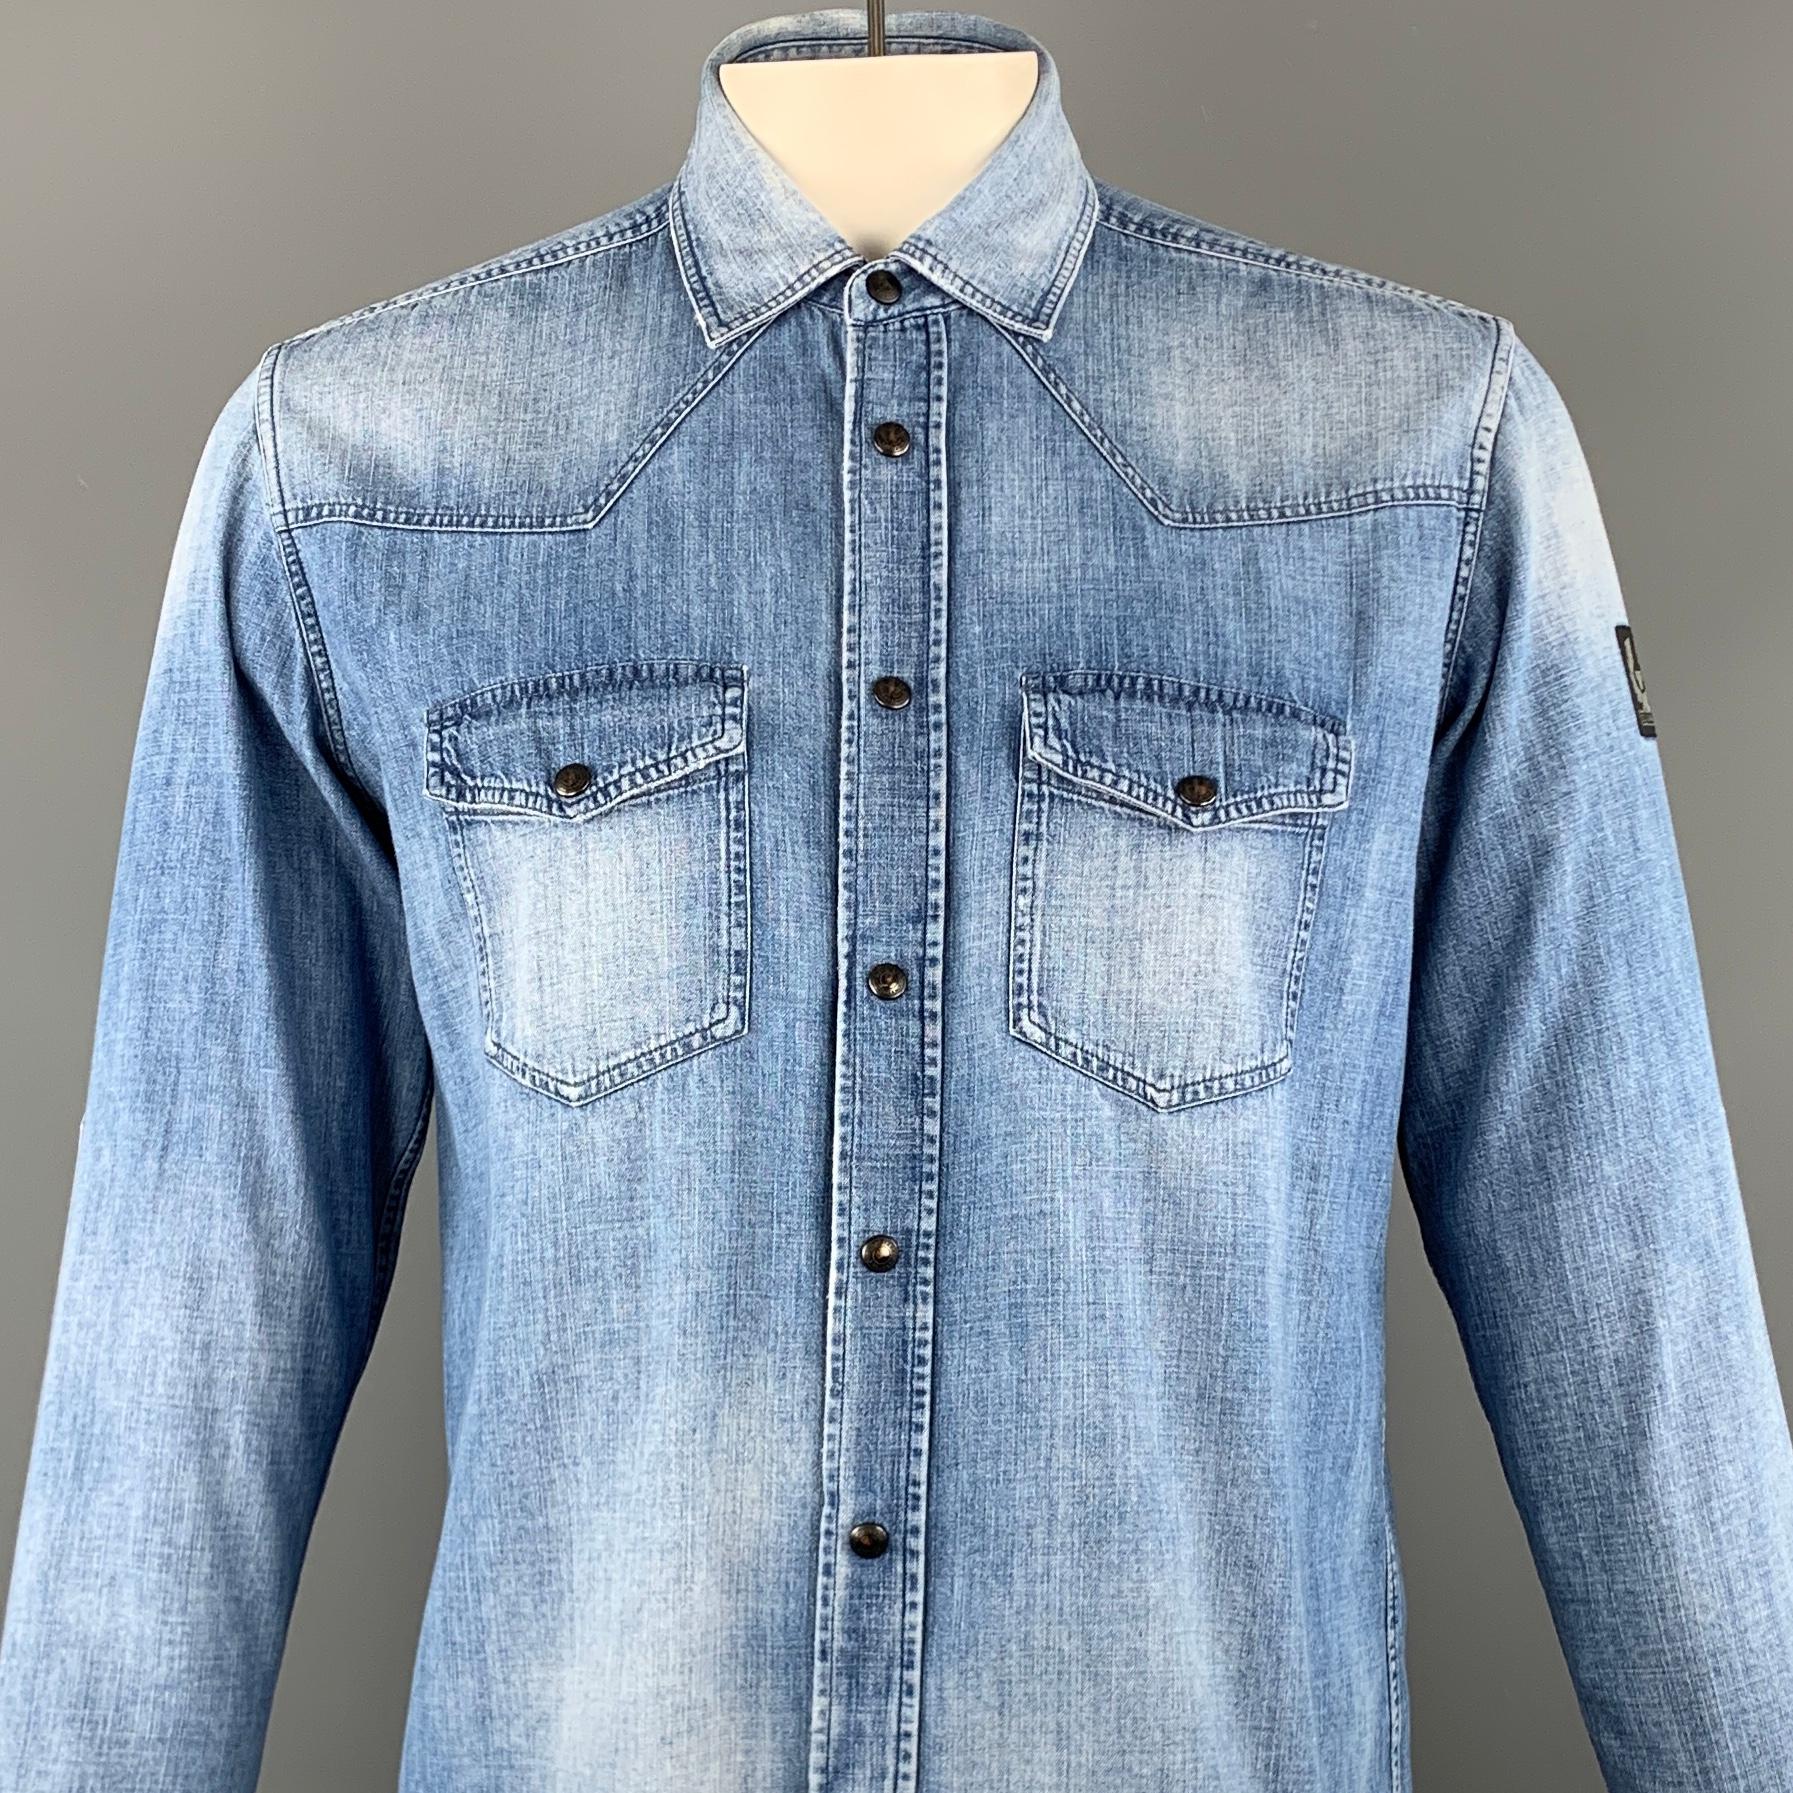 BELSTAFF long sleeve shirt comes in a blue washed cotton / viscose featuring a button up style, western, and a snap button closure. 

Excellent Pre-Owned Condition.
Marked: XL

Measurements:

Shoulder: 17.5 in. 
Chest: 44 in. 
Sleeve: 27.5 in.